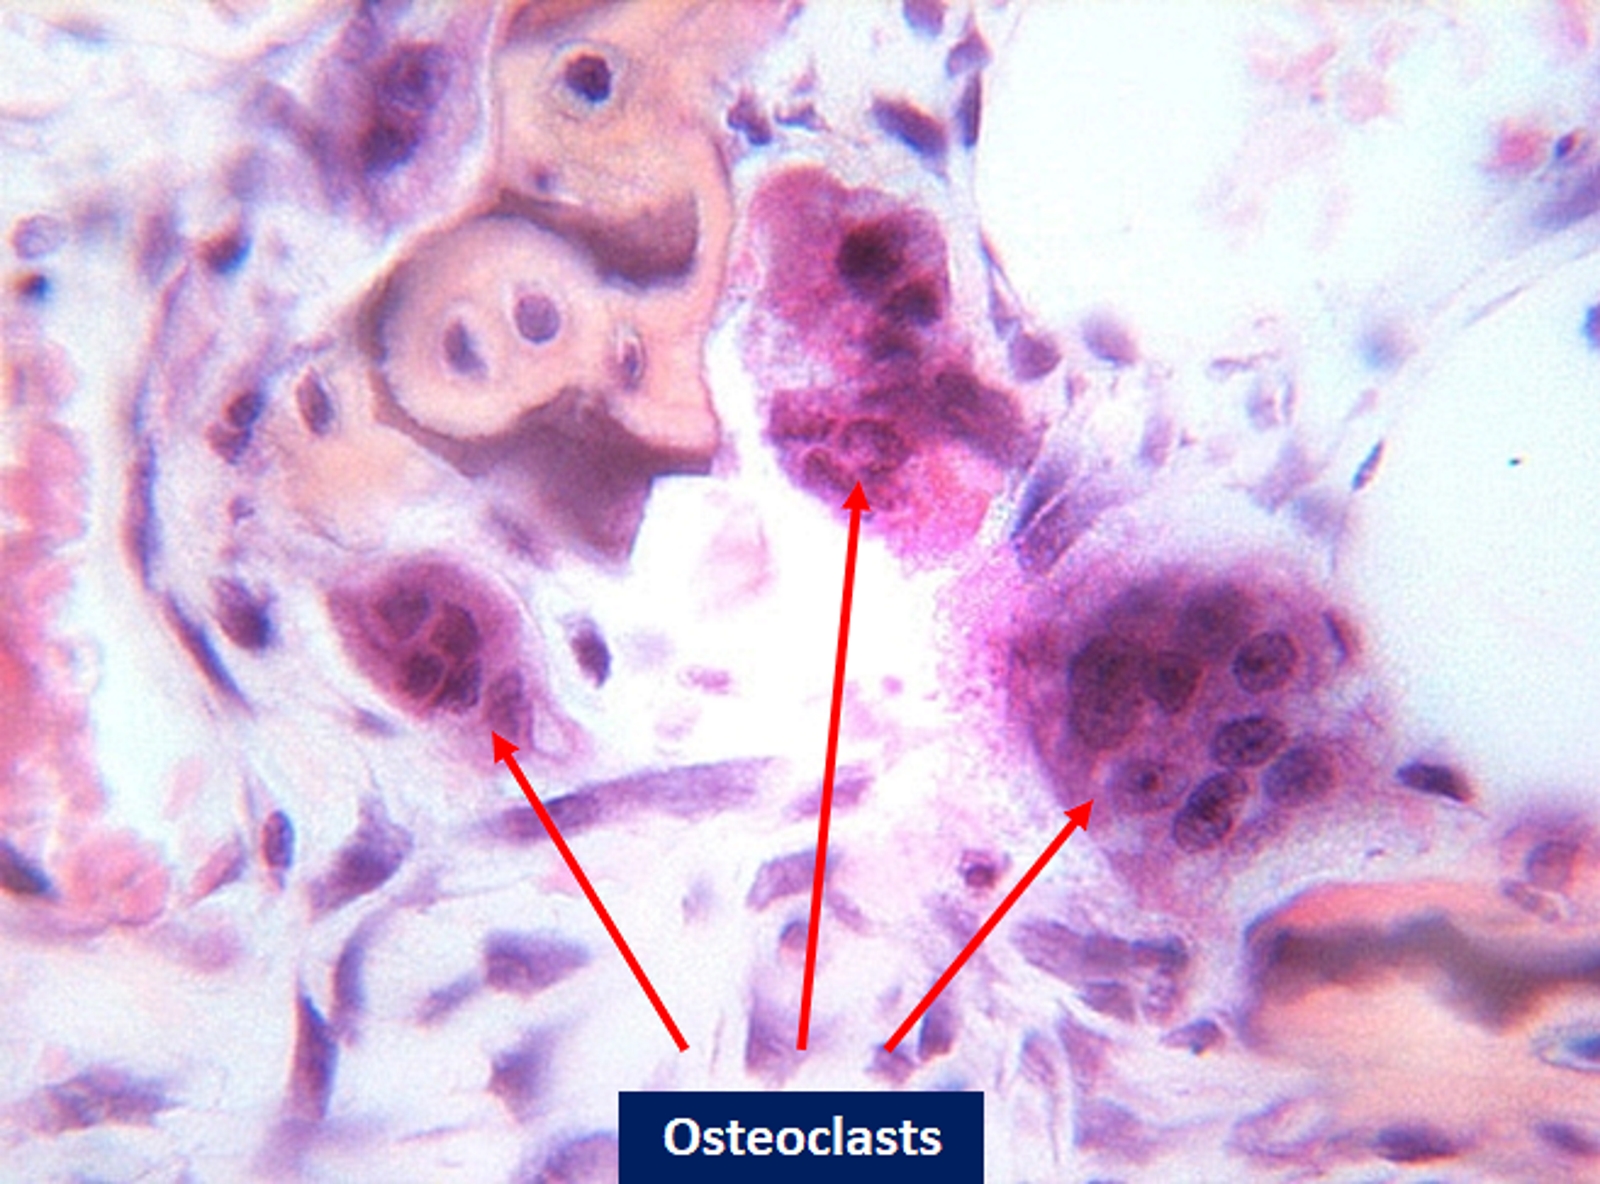 The electron microscope image shows the cells: osteoclasts.